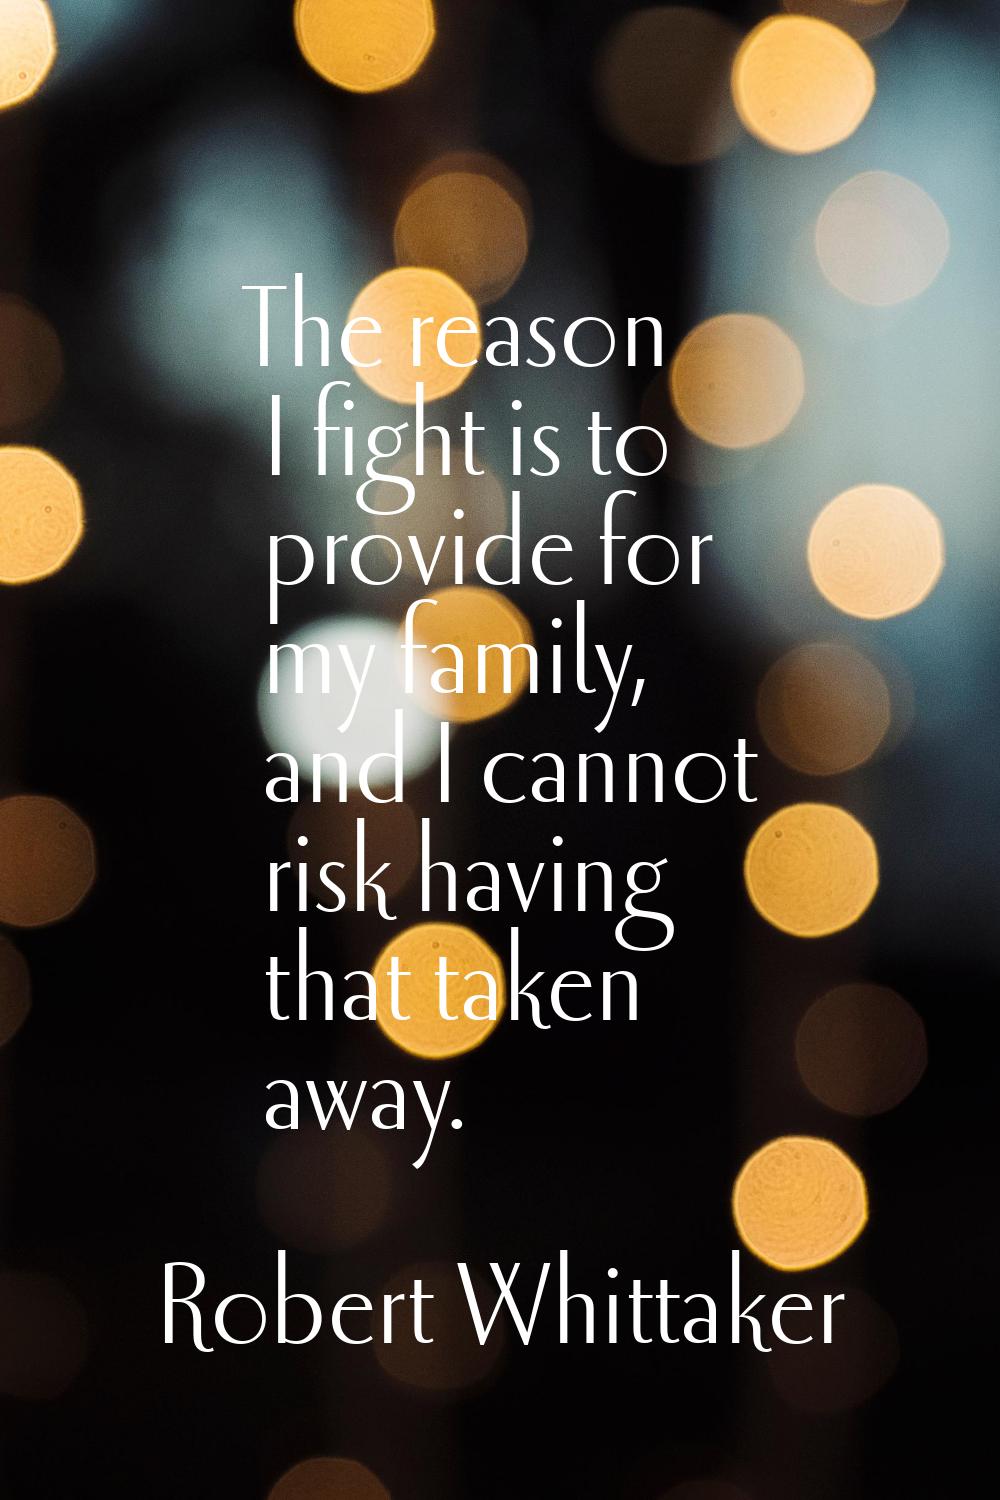 The reason I fight is to provide for my family, and I cannot risk having that taken away.